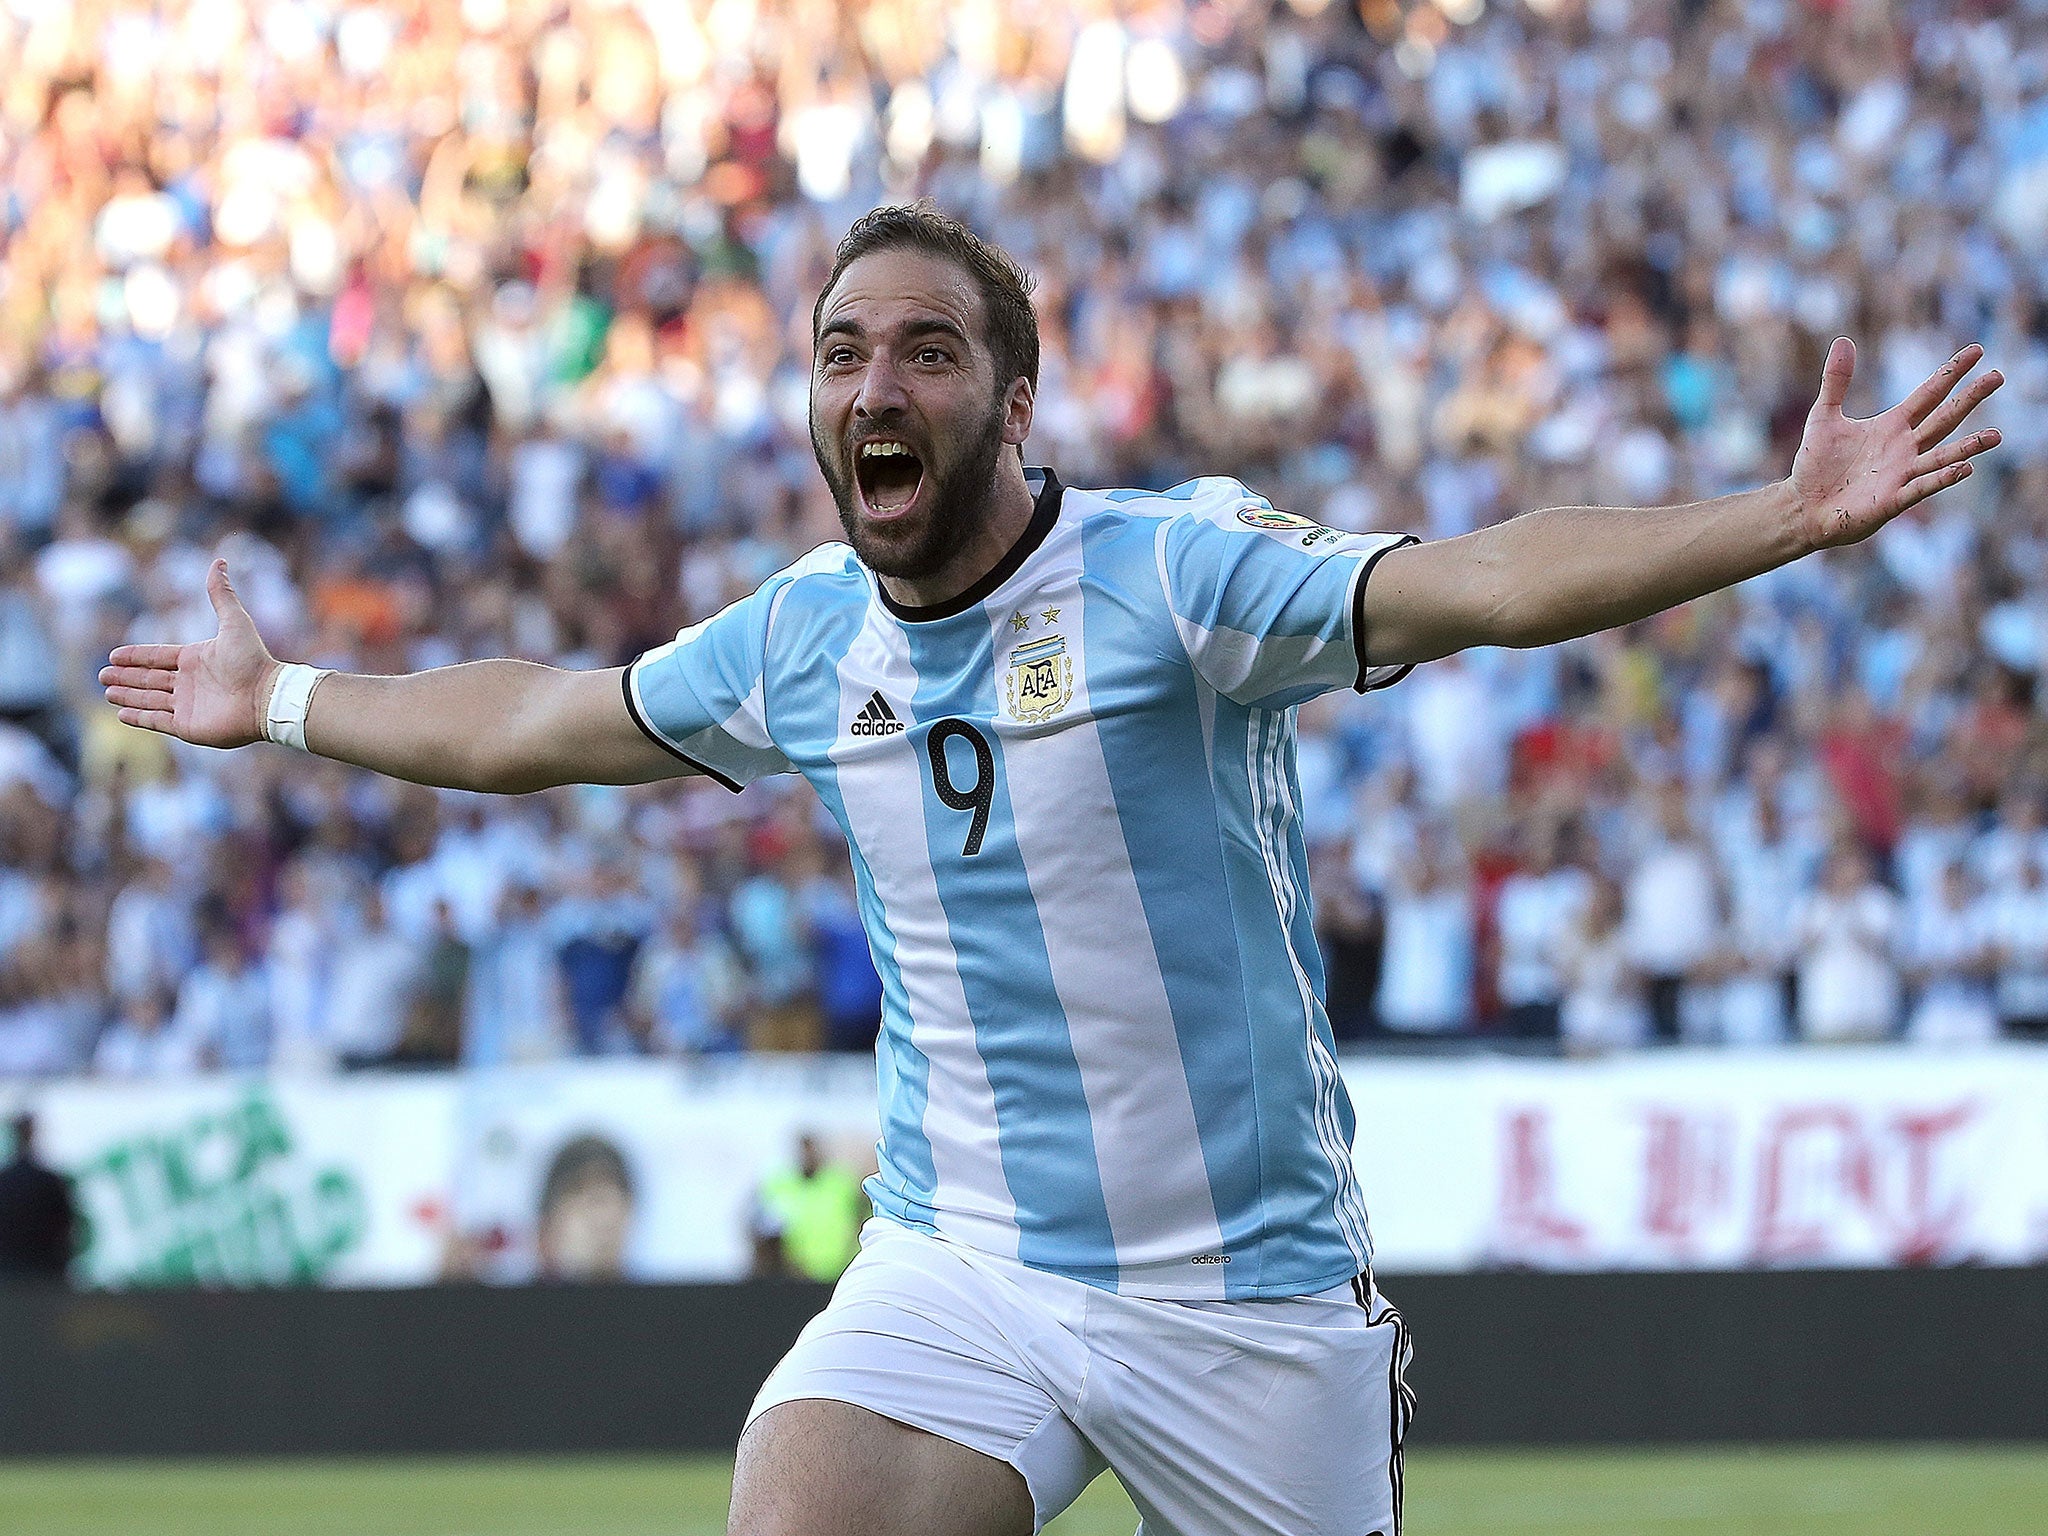 Despite his recent form Higuain was unable to inspire Argentina to Copa America glory